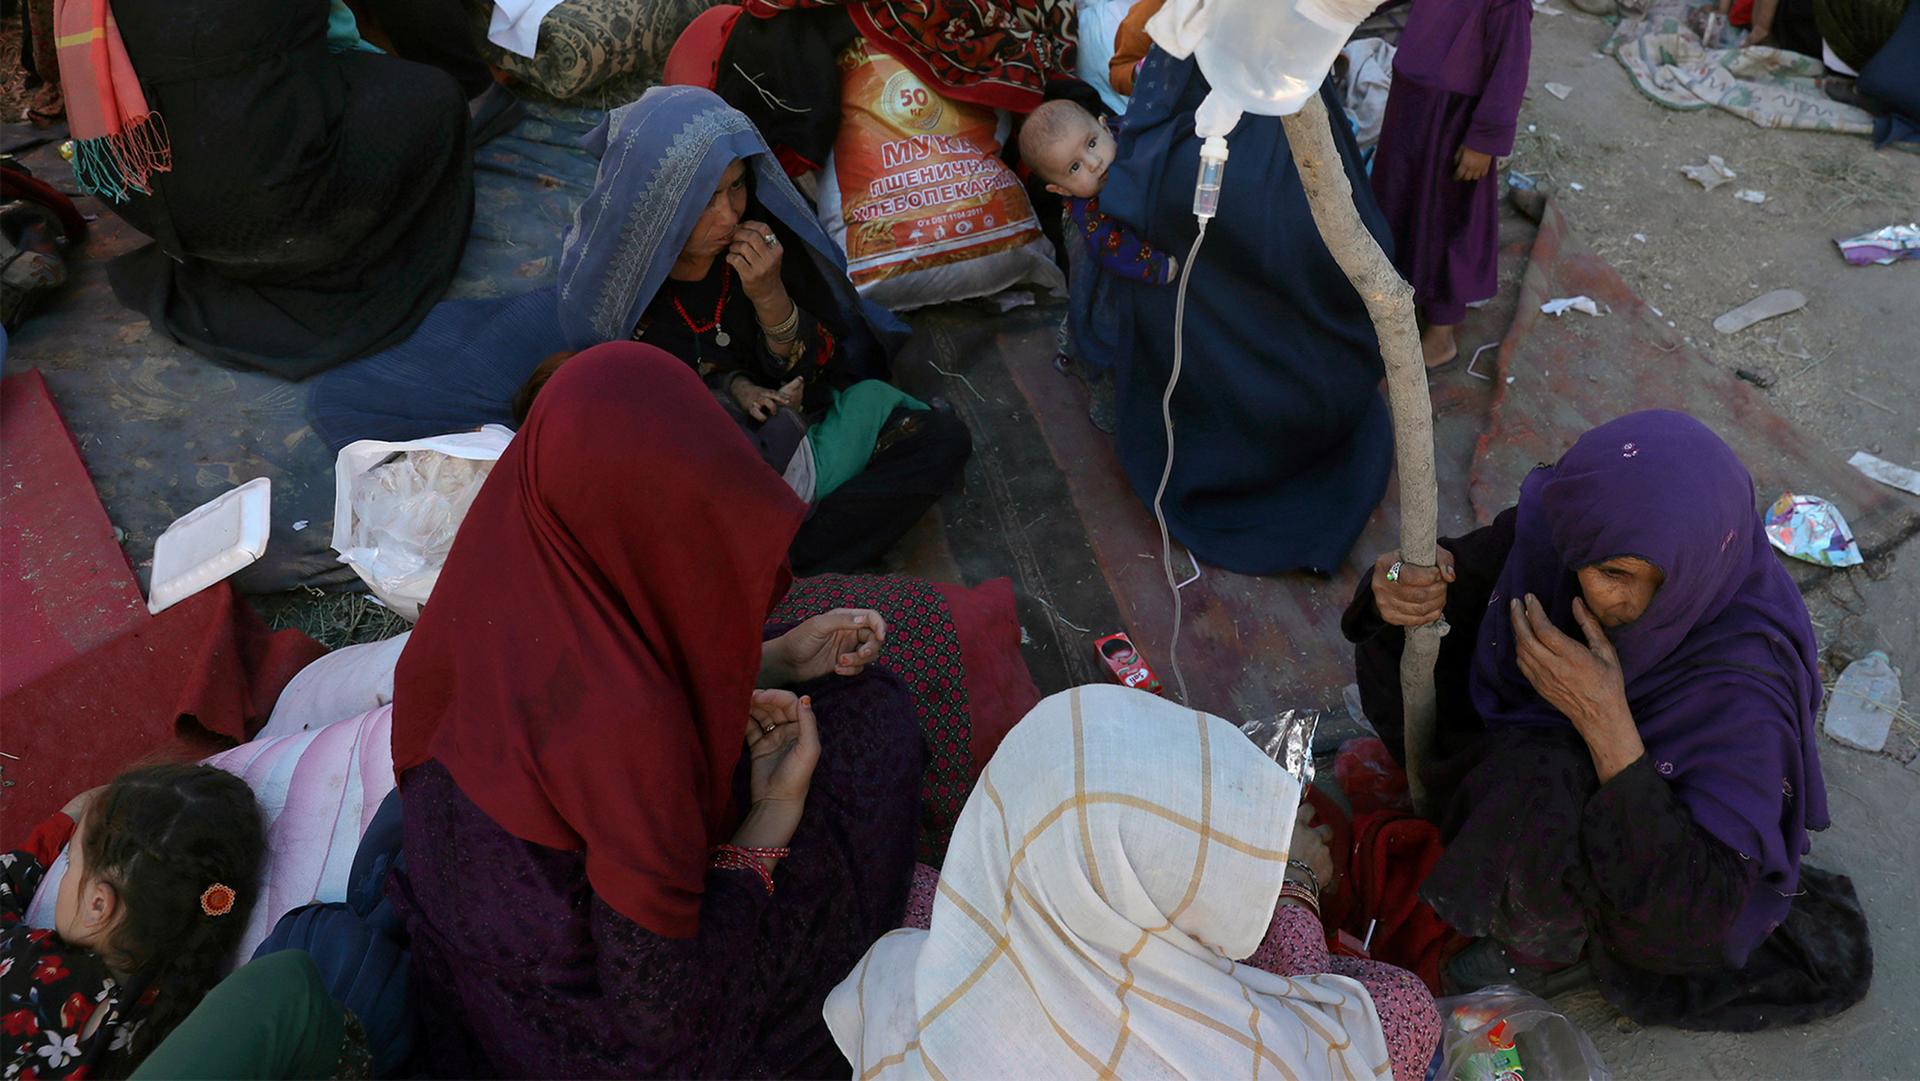 Internally displaced Afghan women from northern provinces, who fled their home due to fighting between the Taliban and Afghan security personnel, receive medical care in a public park in Kabul, Afghanistan